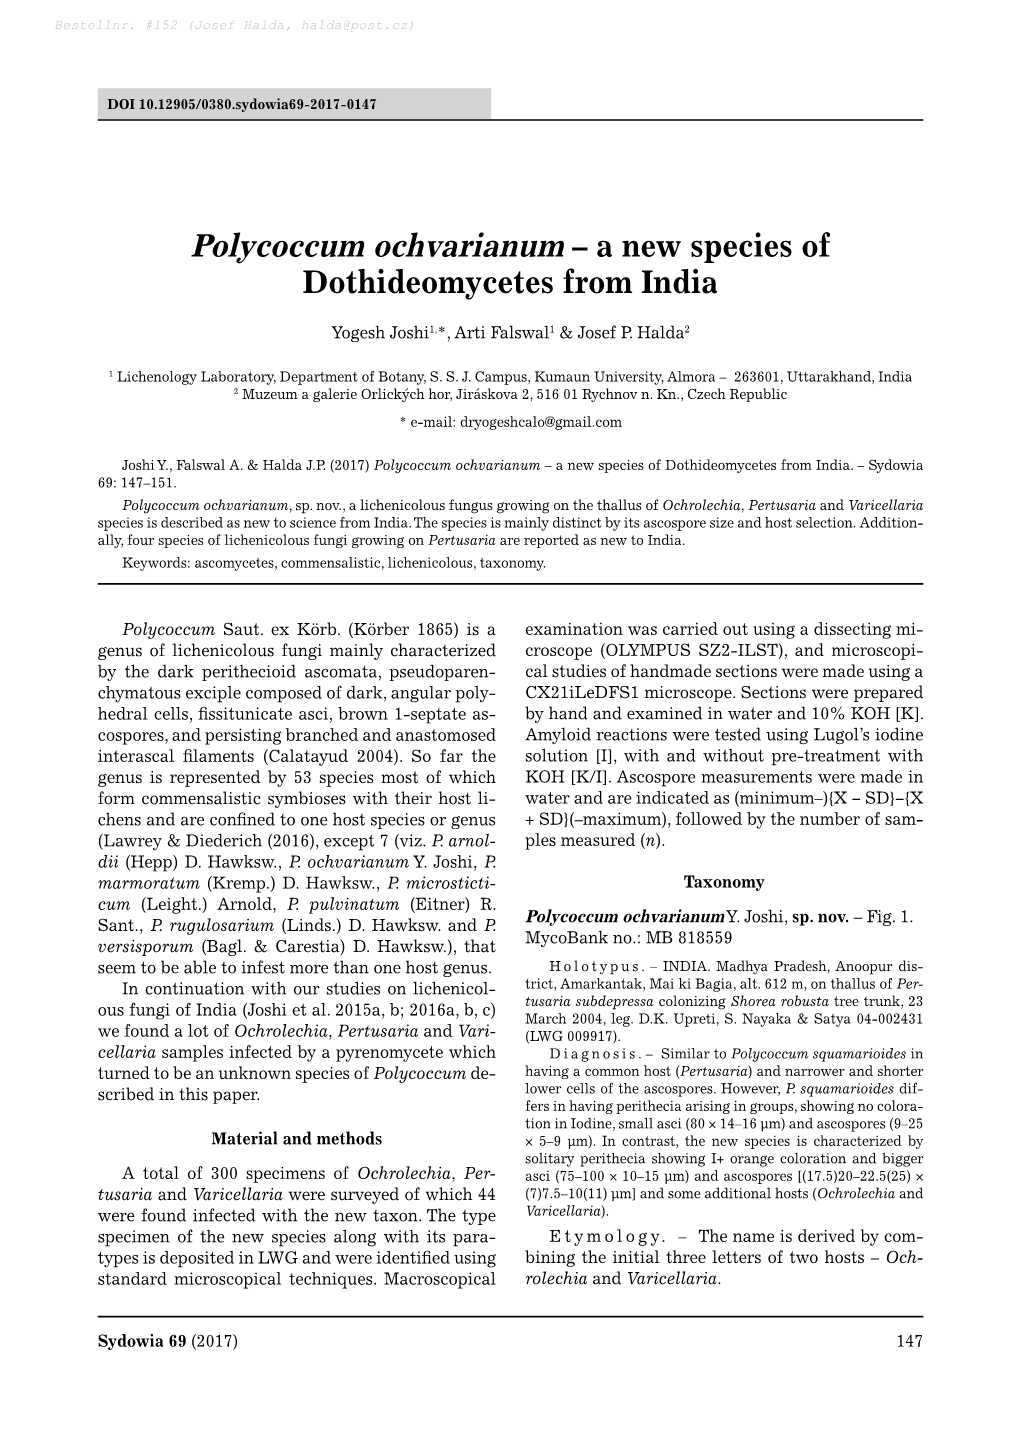 Polycoccum Ochvarianum – a New Species of Dothideomycetes from India